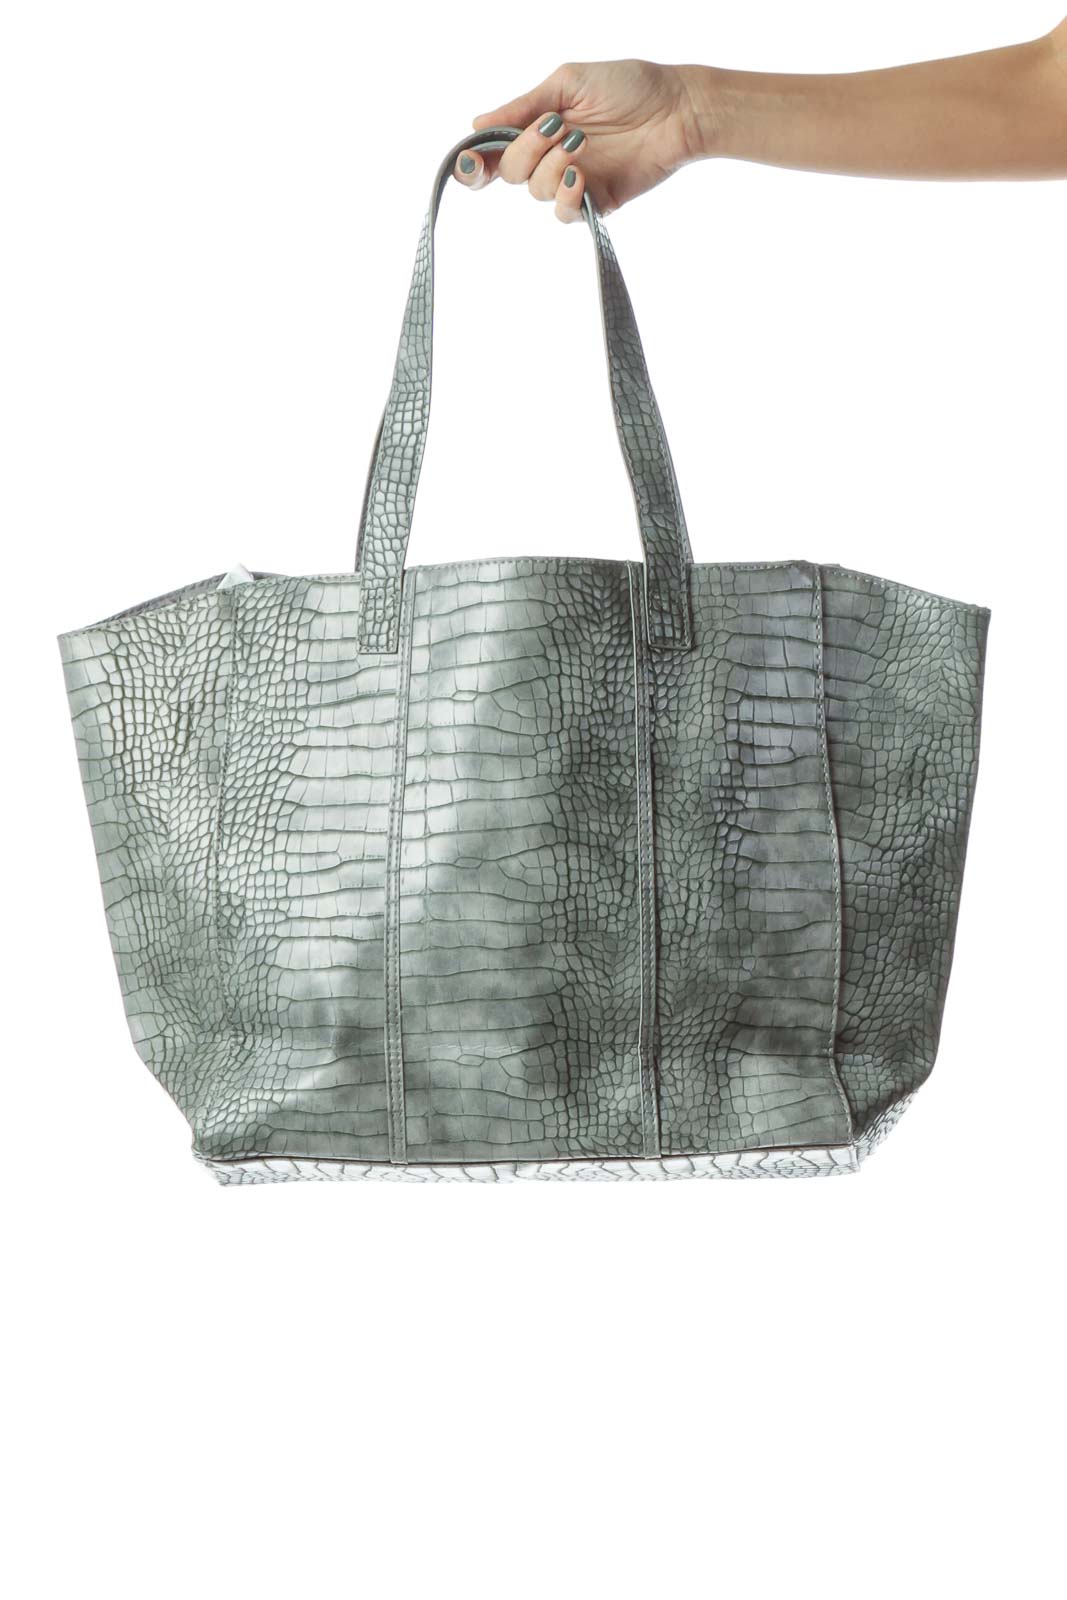 Gray Snake Skin Faux Leather Tote Front